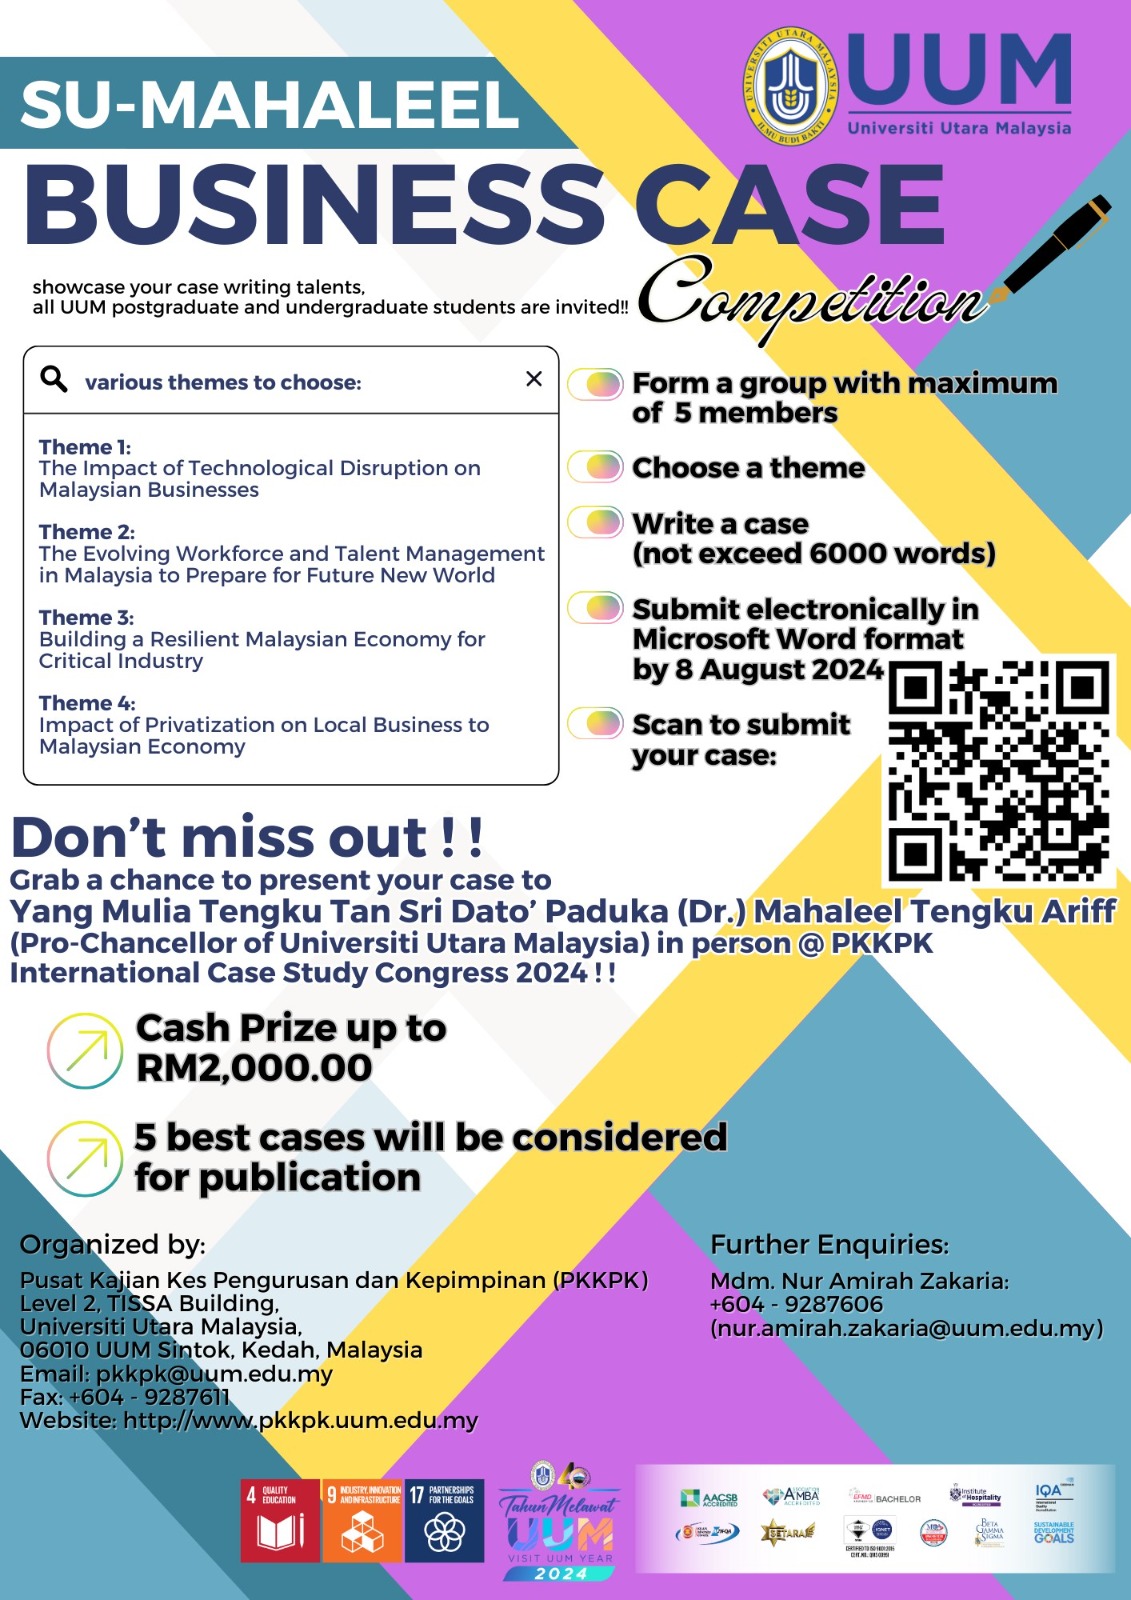 SU-MAHALEEL BUSINESS CASE COMPETITION